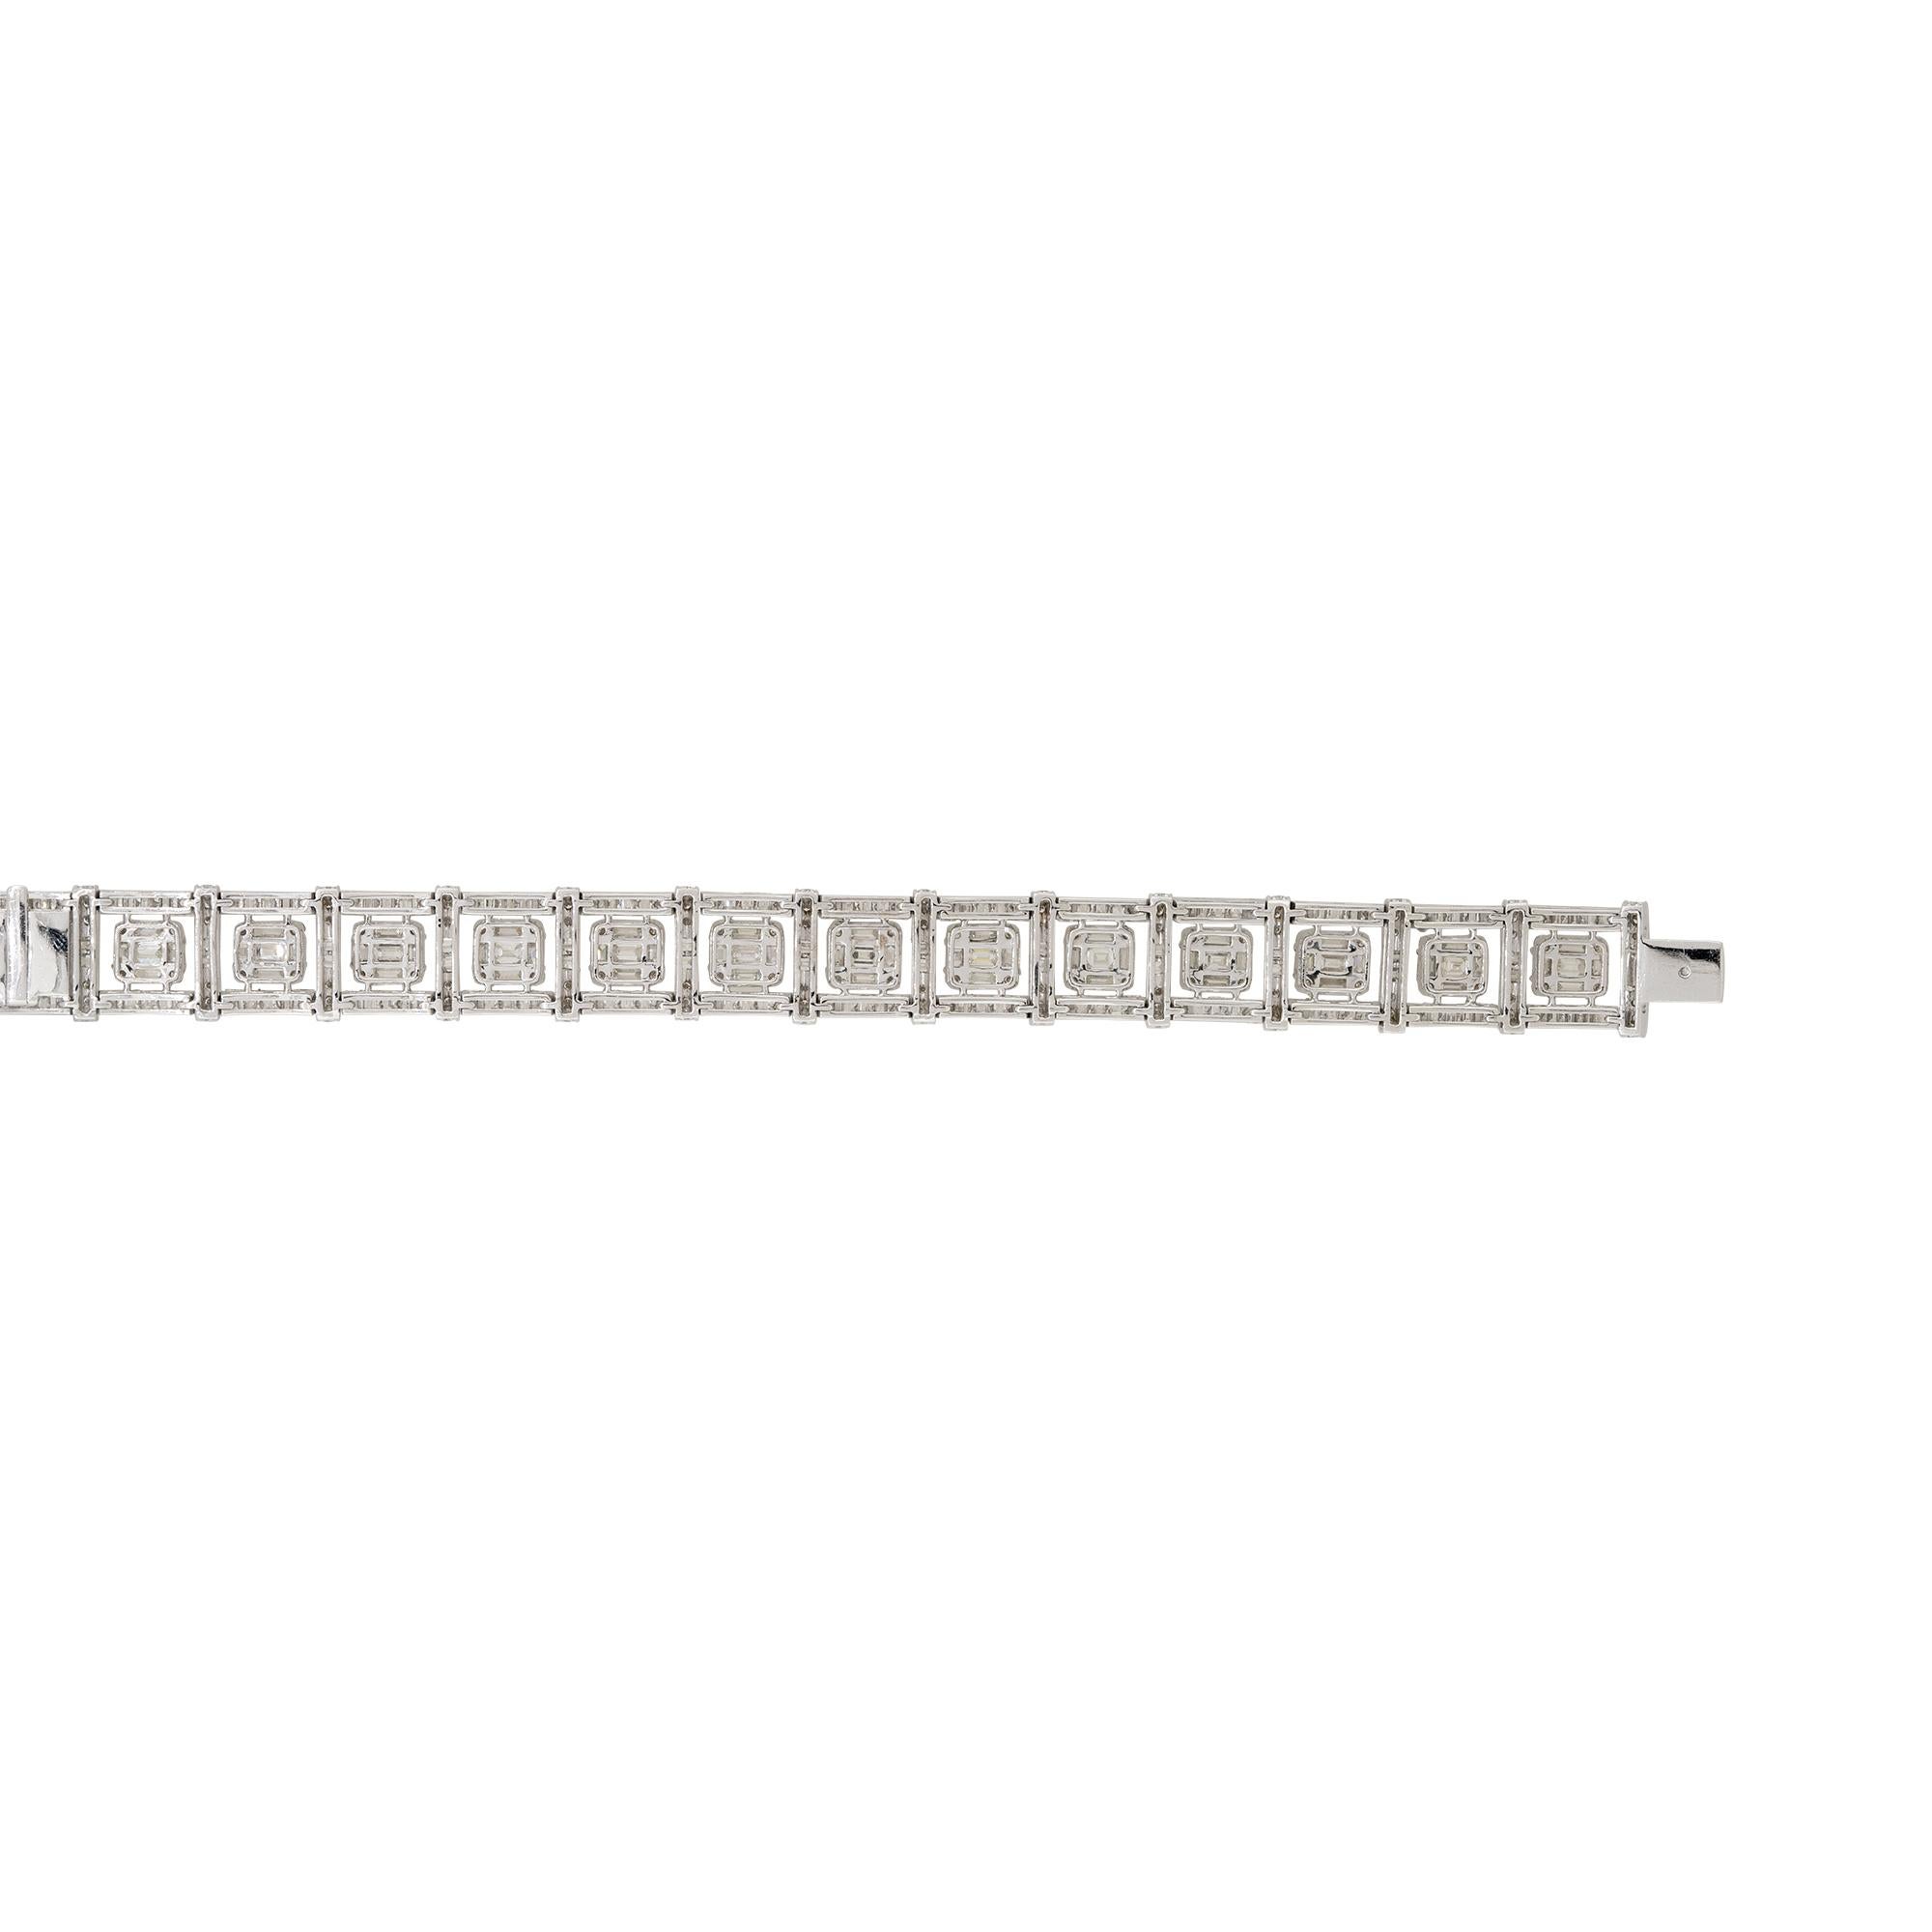 Product Style: Square Mosaic Station Diamond Bracelet
Material: 18 Karat White Gold
Diamond Details: There are approximately 16.27 carats of Baguette cut diamonds (238 stones) and 3.4 carats of Round Brilliant cut diamonds (168 stones), with a total